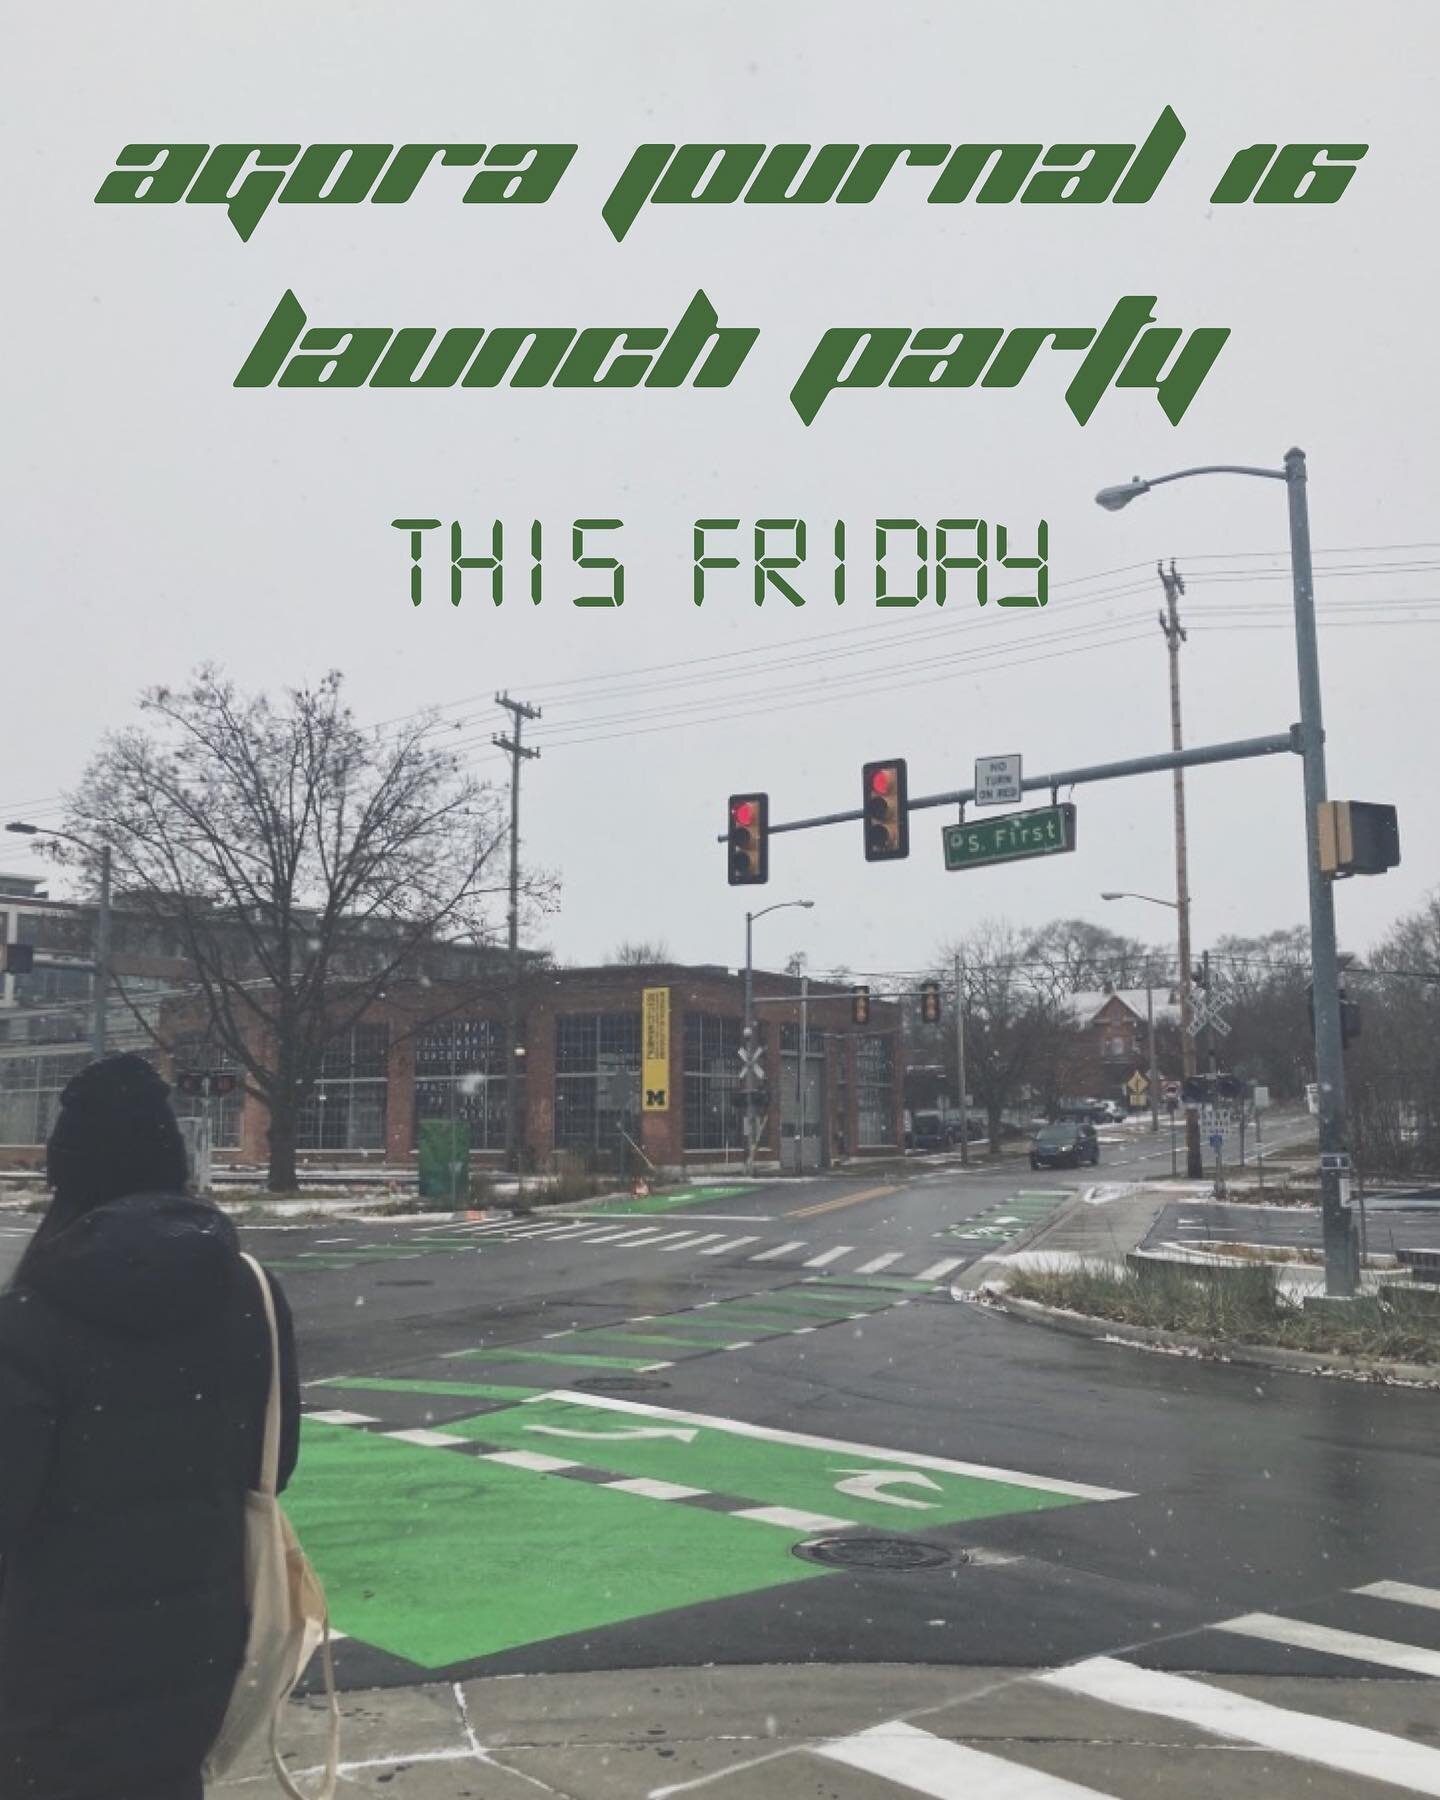 4 more days until the Agora Launch Party! 🍾 📖 Come join us at the Taubman College Liberty Research Annex (located by Blank Slate Creamery and Argus Farm Stop) this Friday @ 6PM